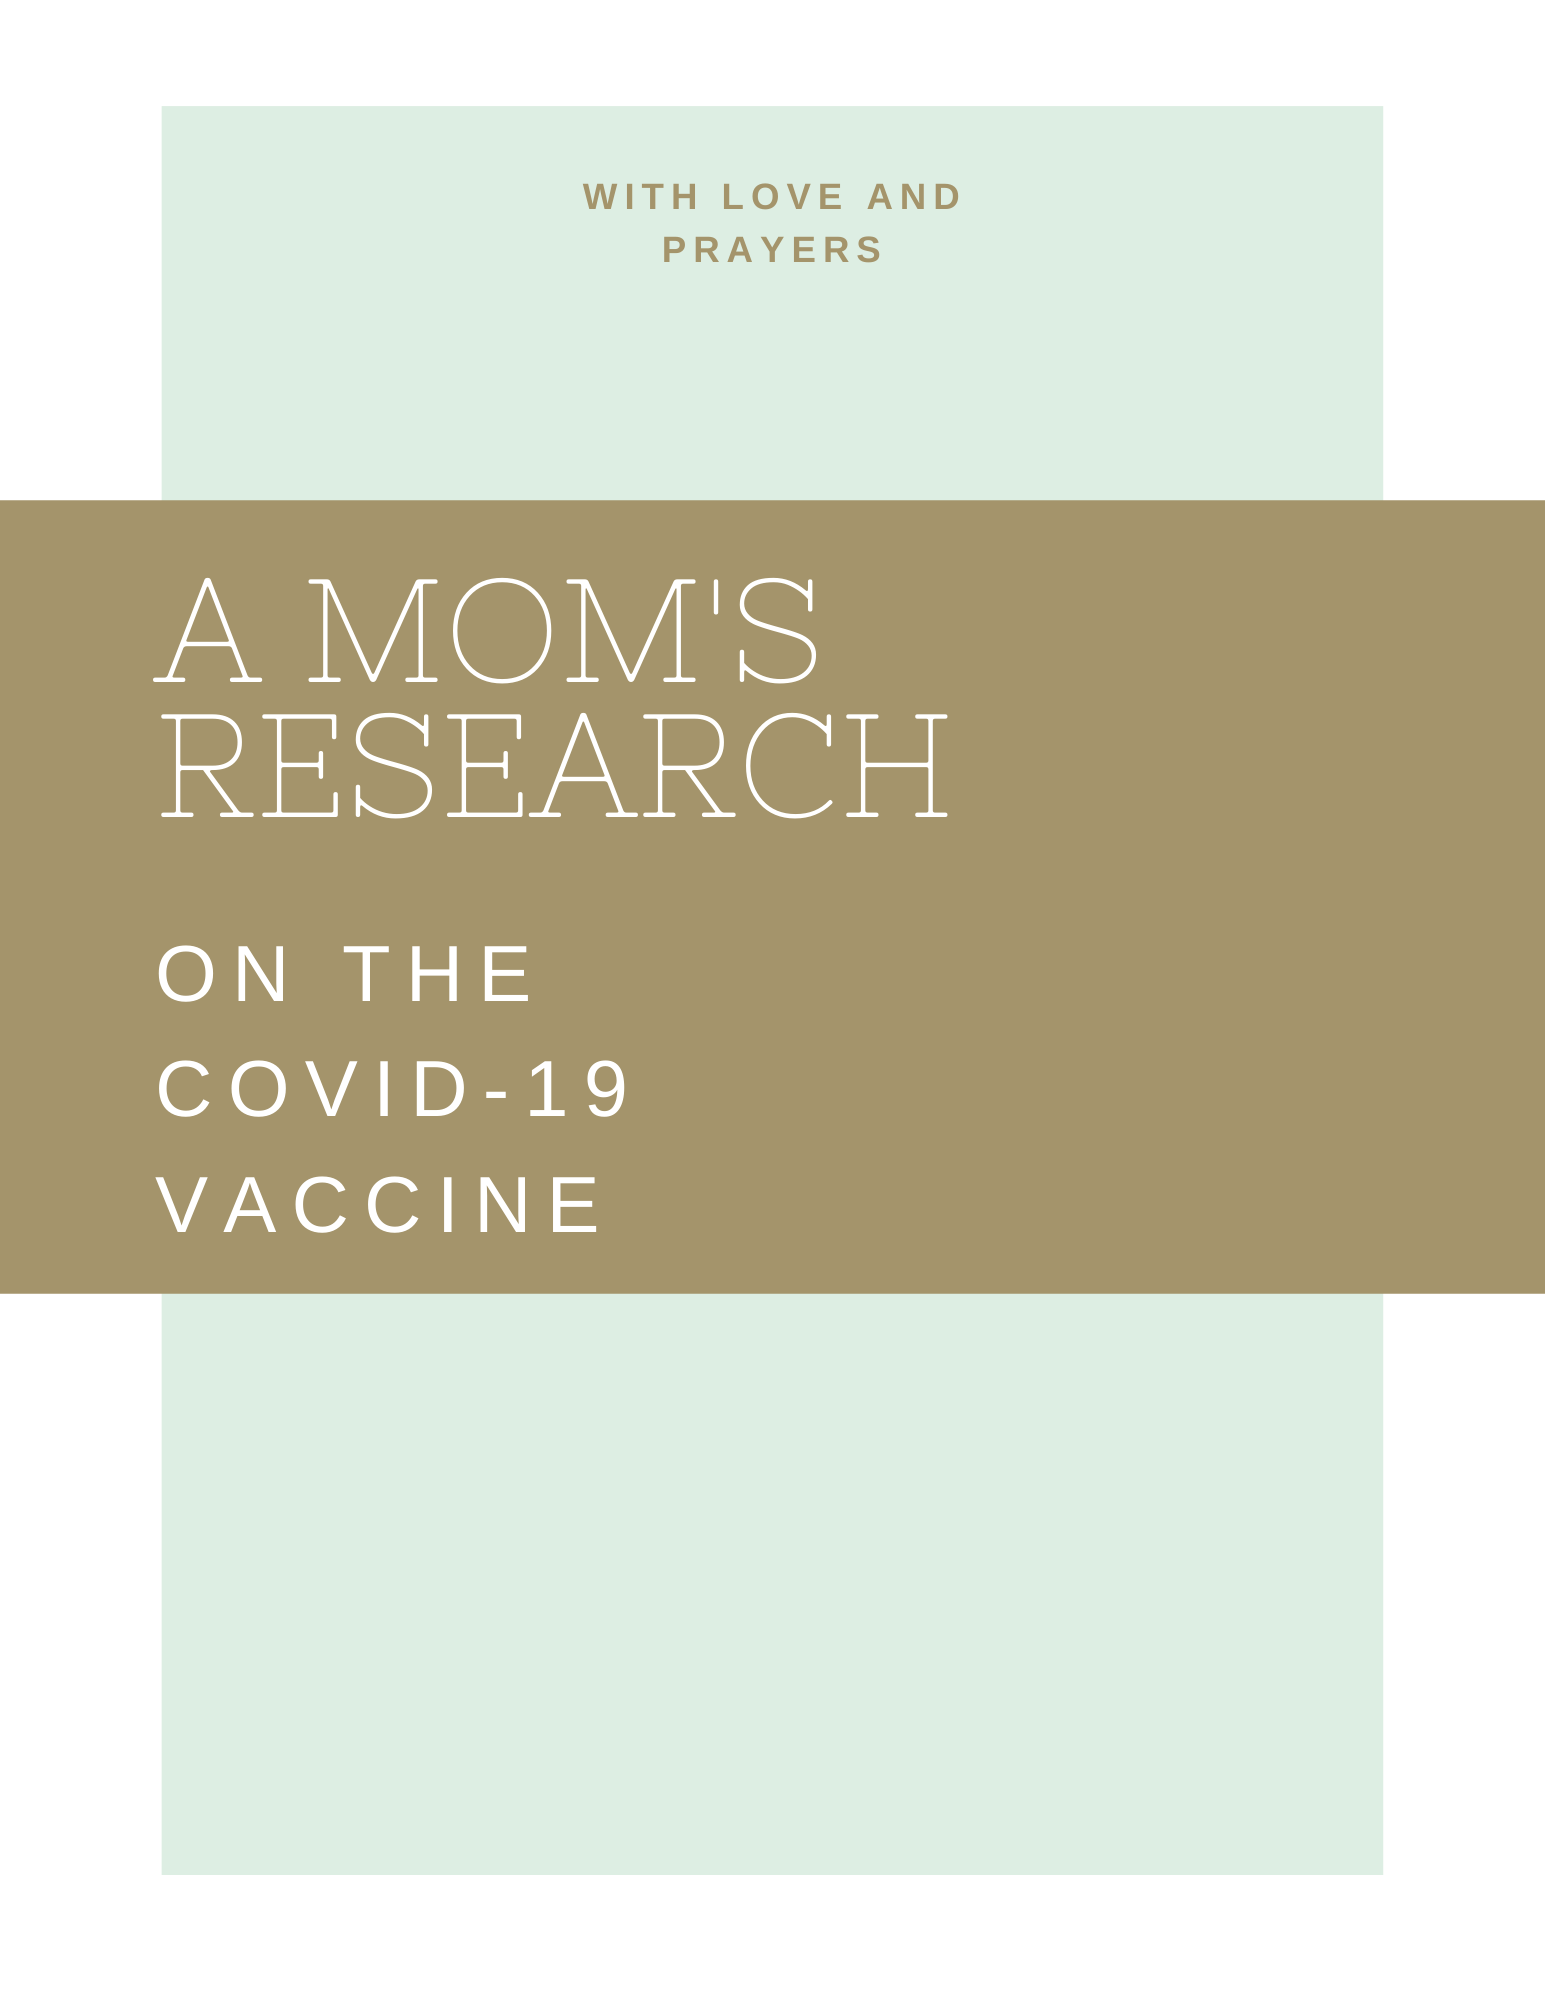 A Mom’s Research on the COVID Vaccine